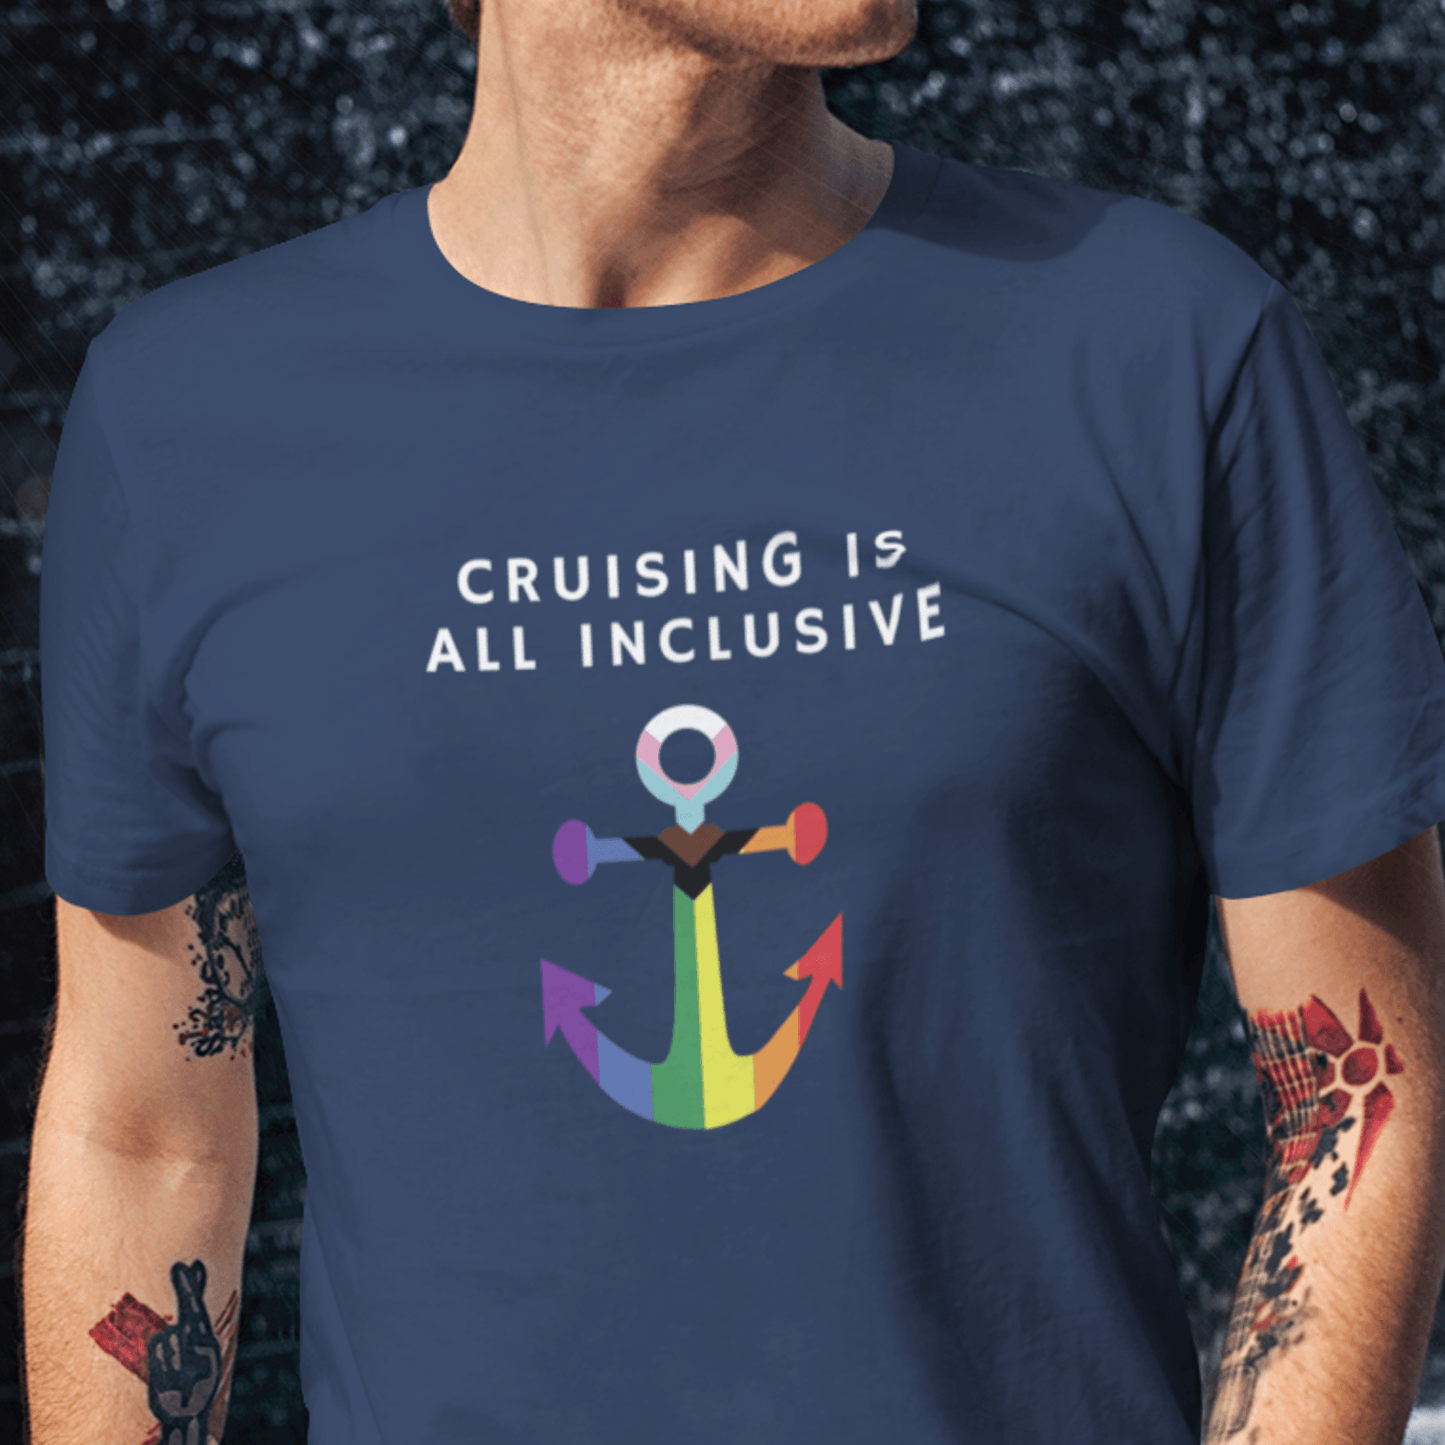 Cruising is All Inclusive - Cruise Shirt